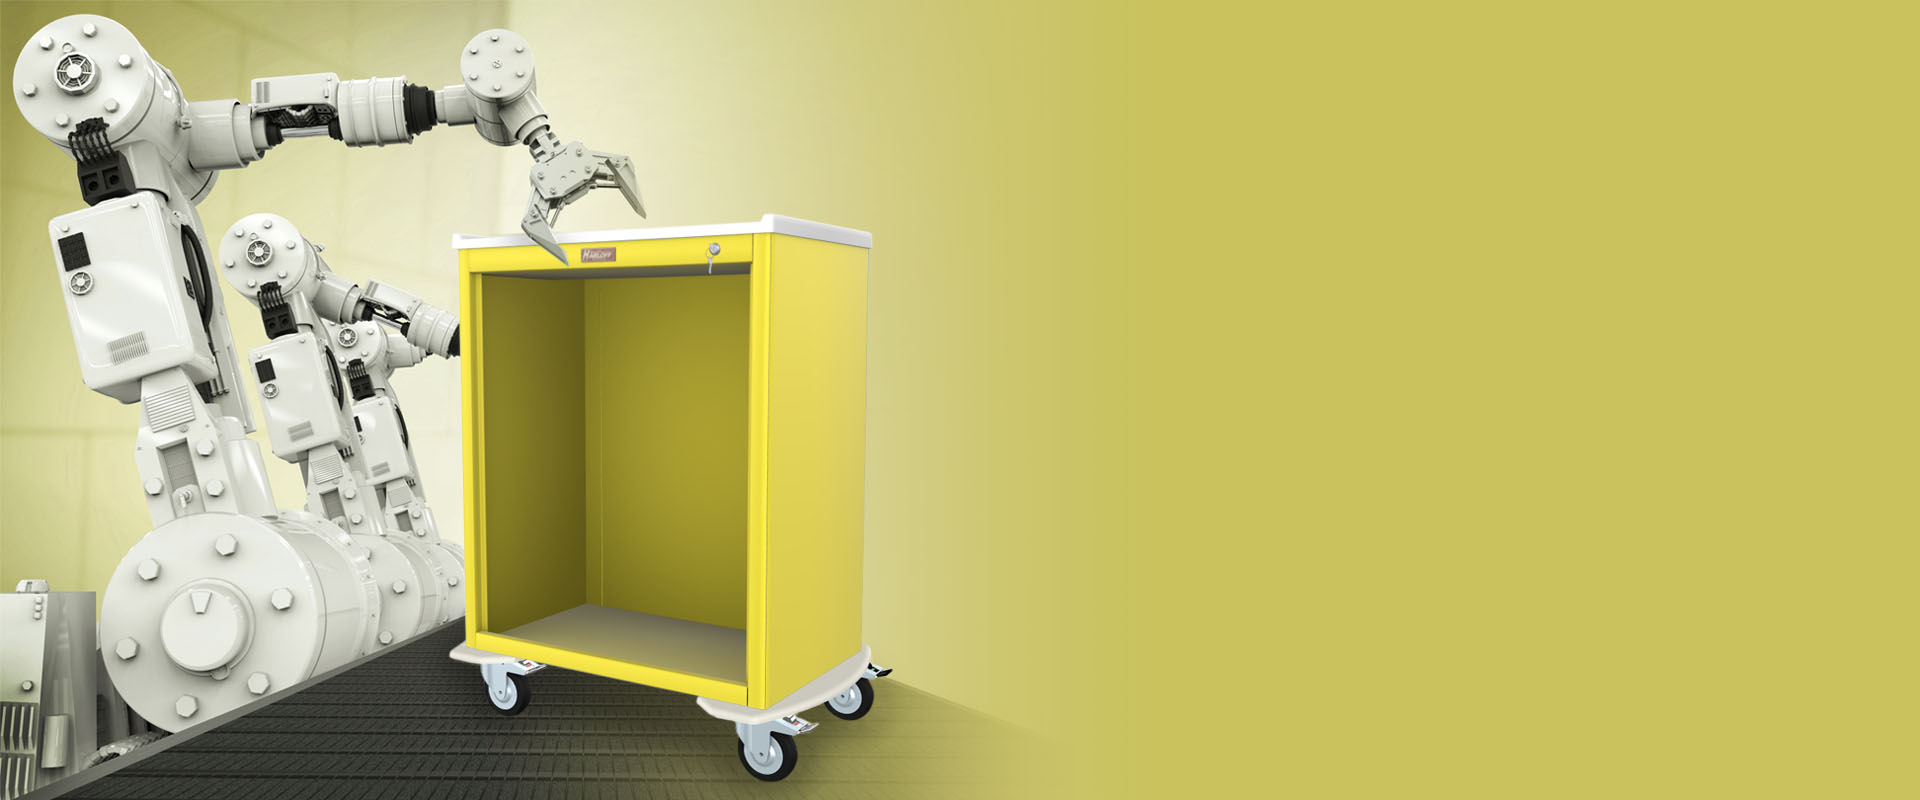 Build Your Own Isolation or Infection Control Cart Category Image